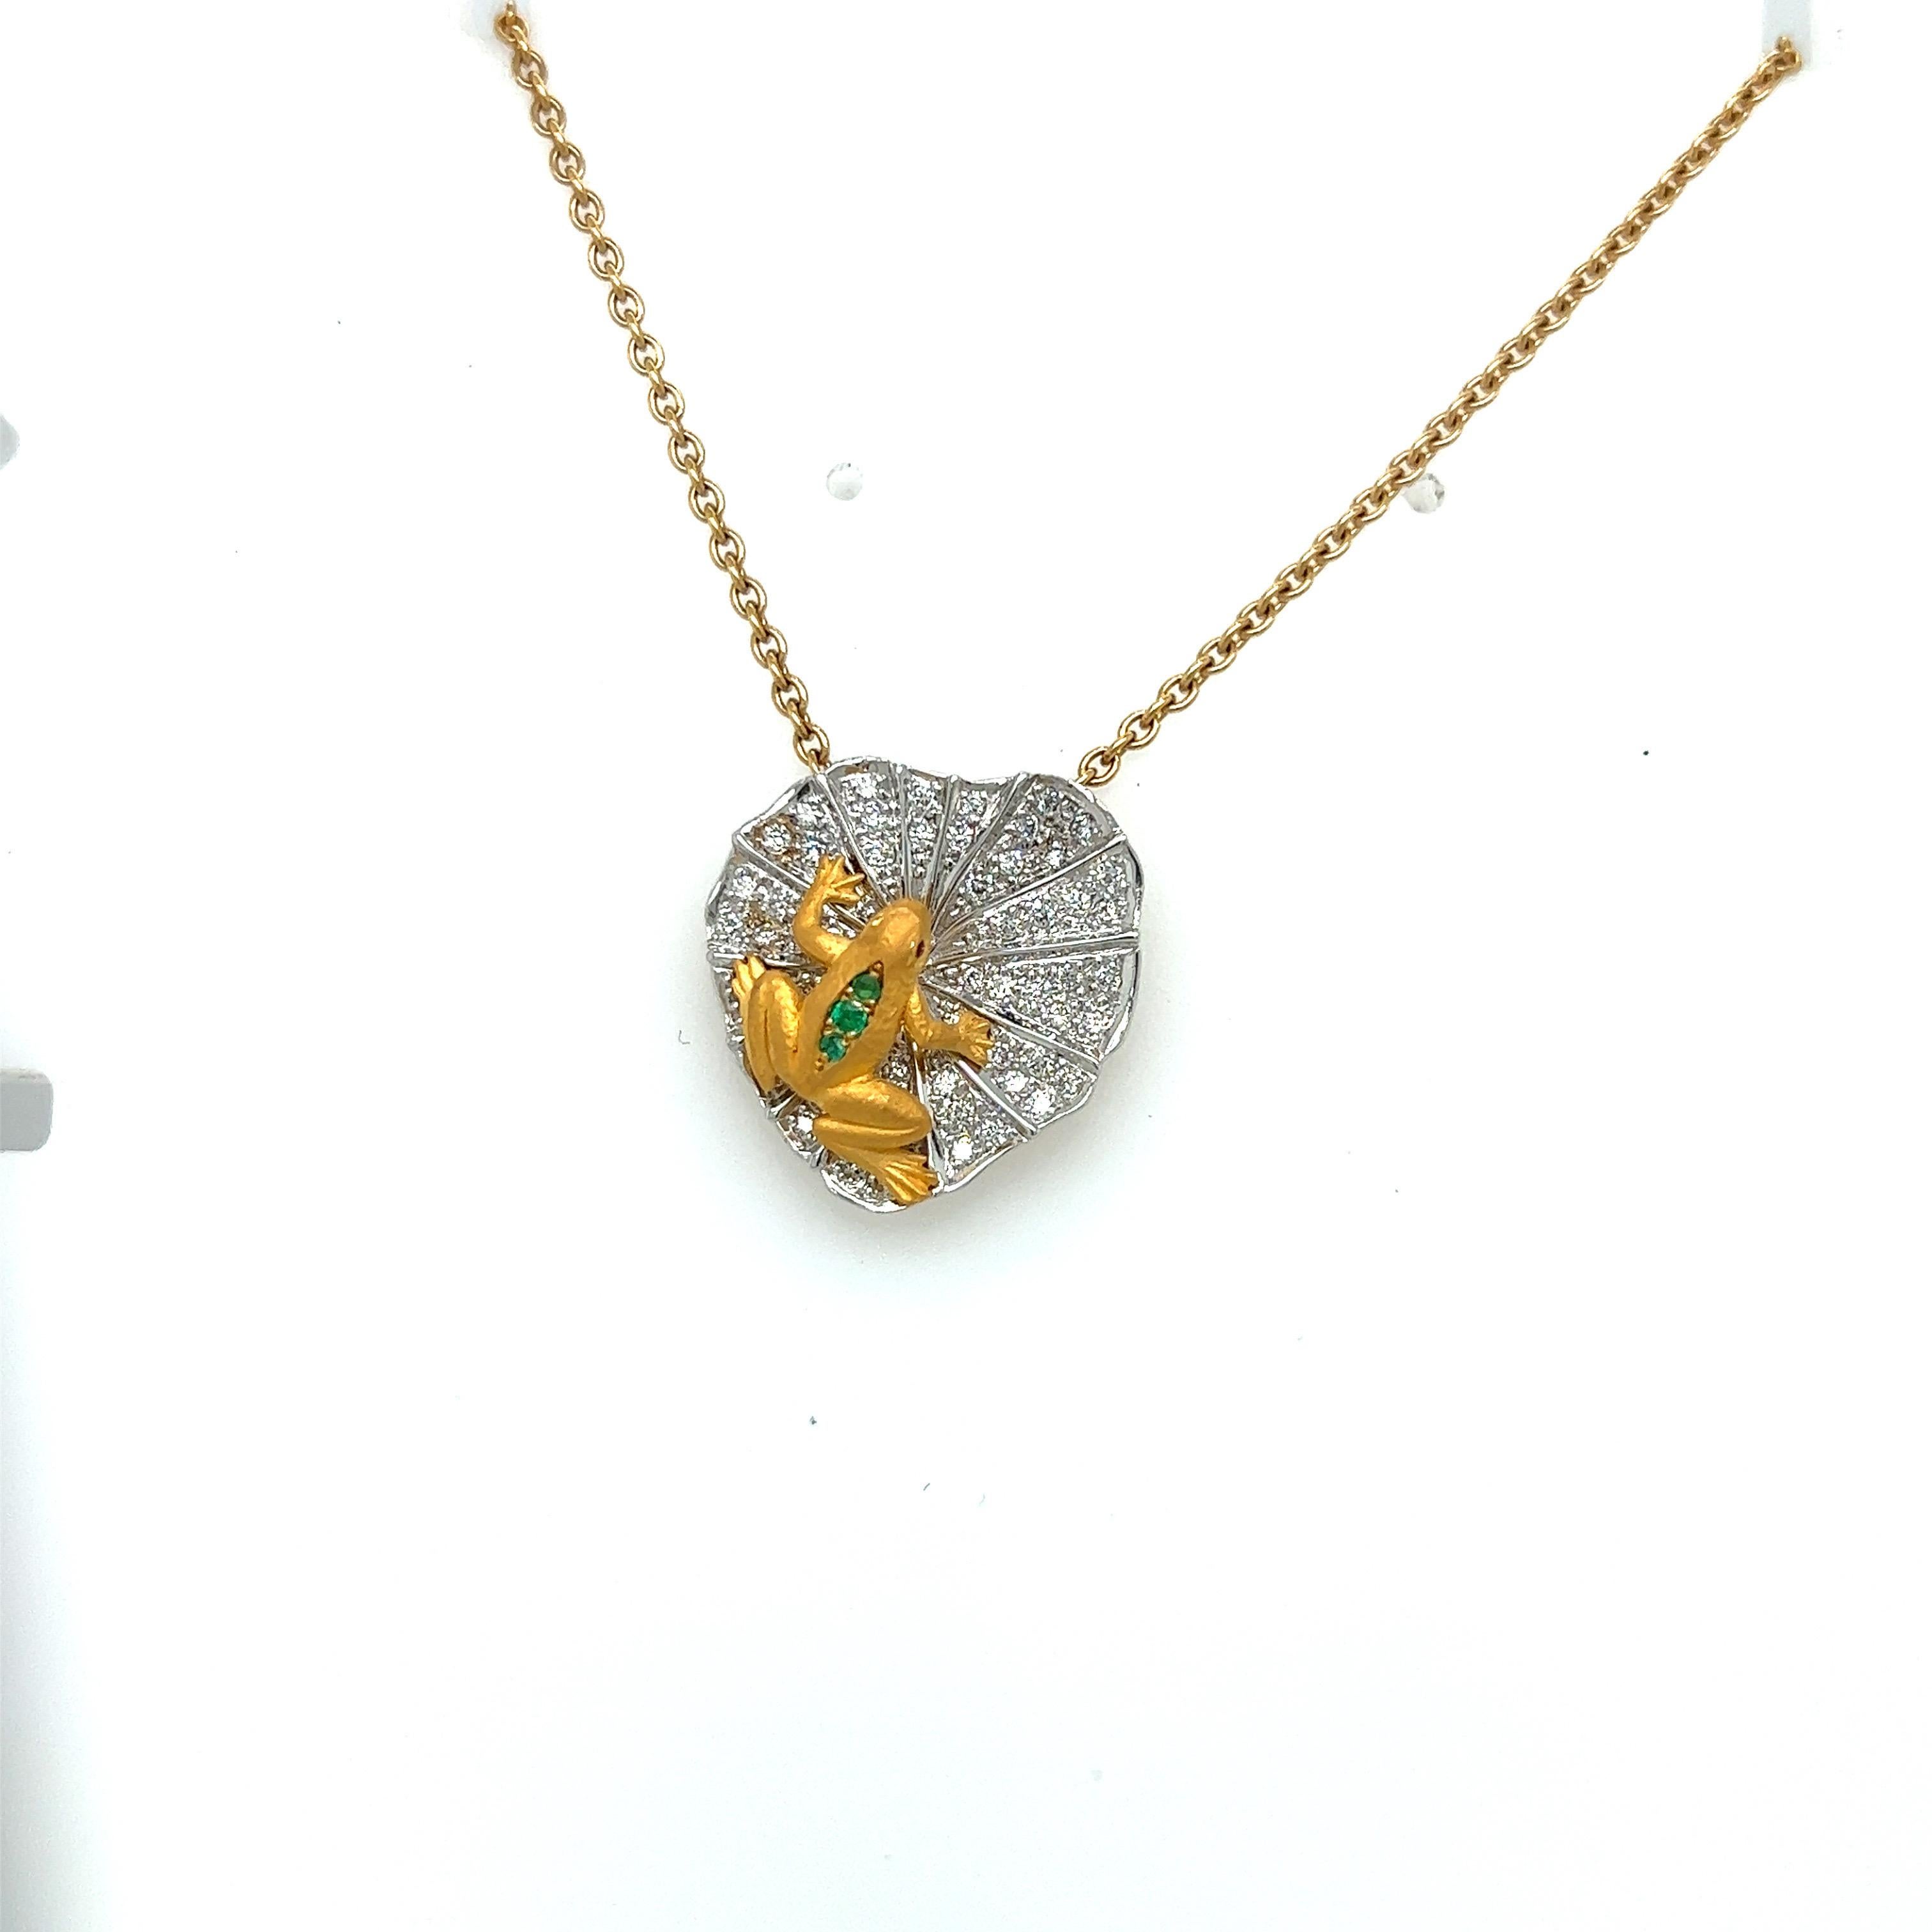 Carrera Y Carrera has built its its famous name on figurative designs, an obsession with surface finishes, and a compelling way of seeing beauty in art and nature.
This 18 karat yellow gold pendant is the perfect example of Carrera's iconic work. An